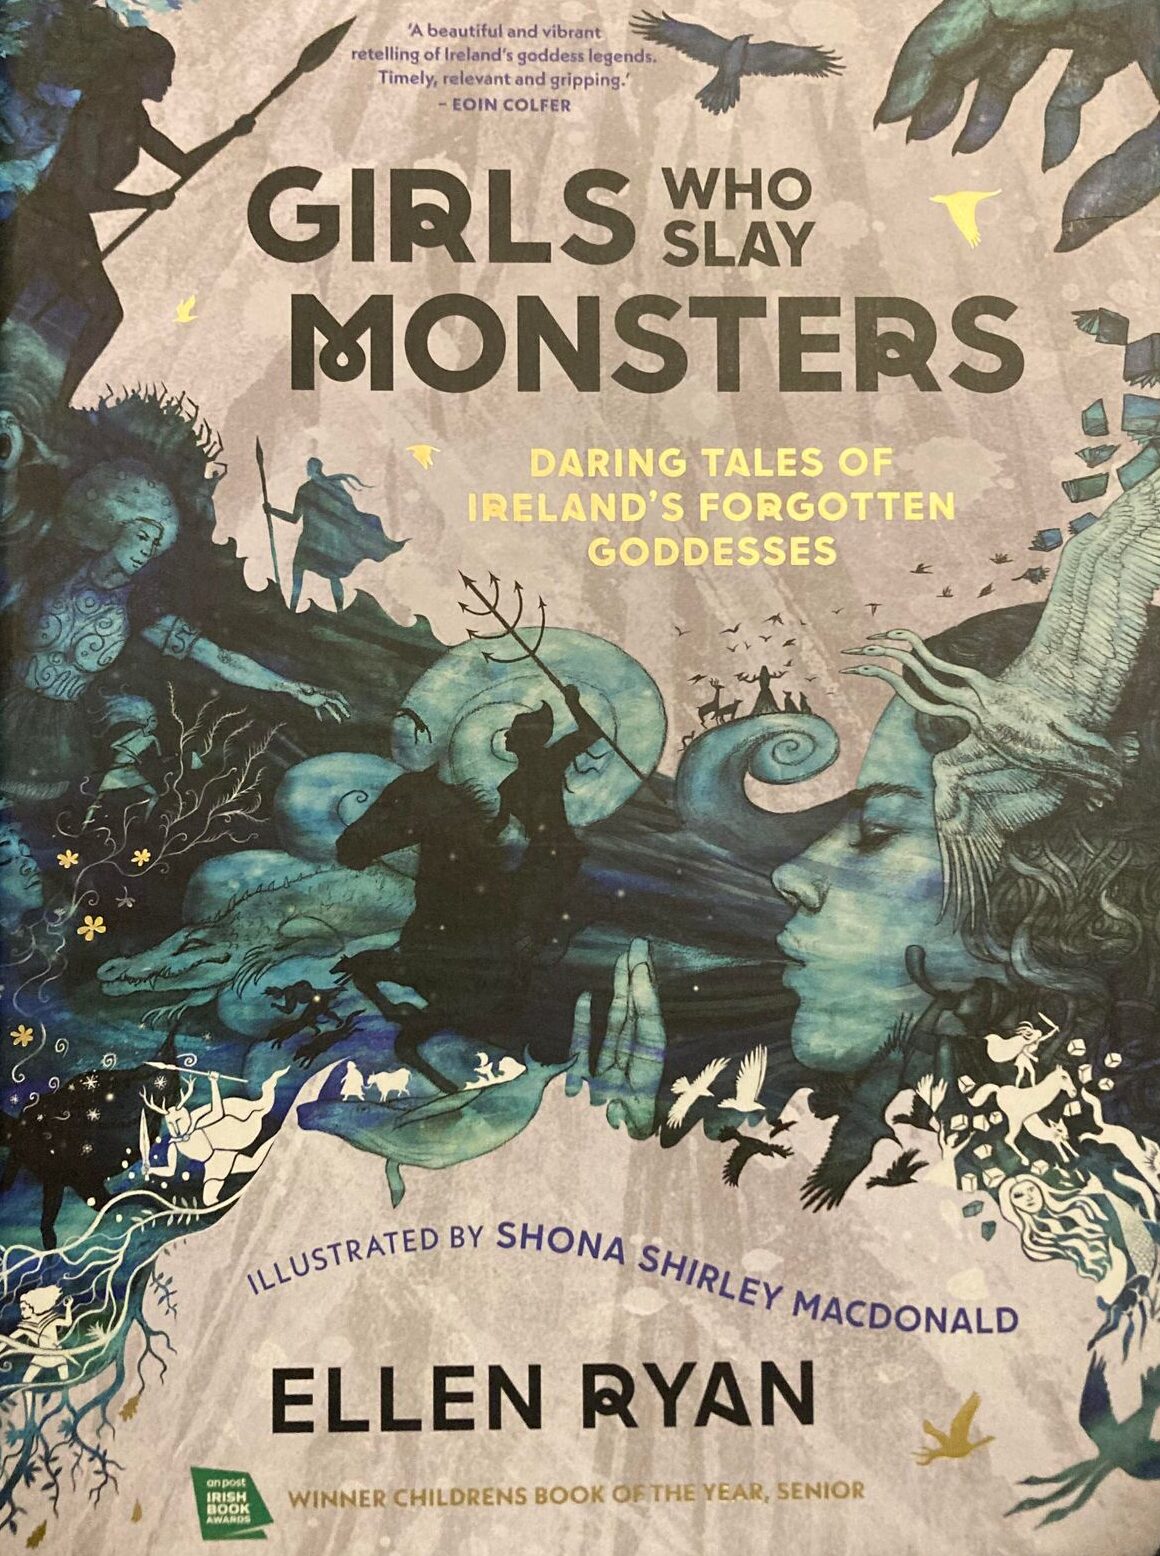 Girls who slay monsters book cover.